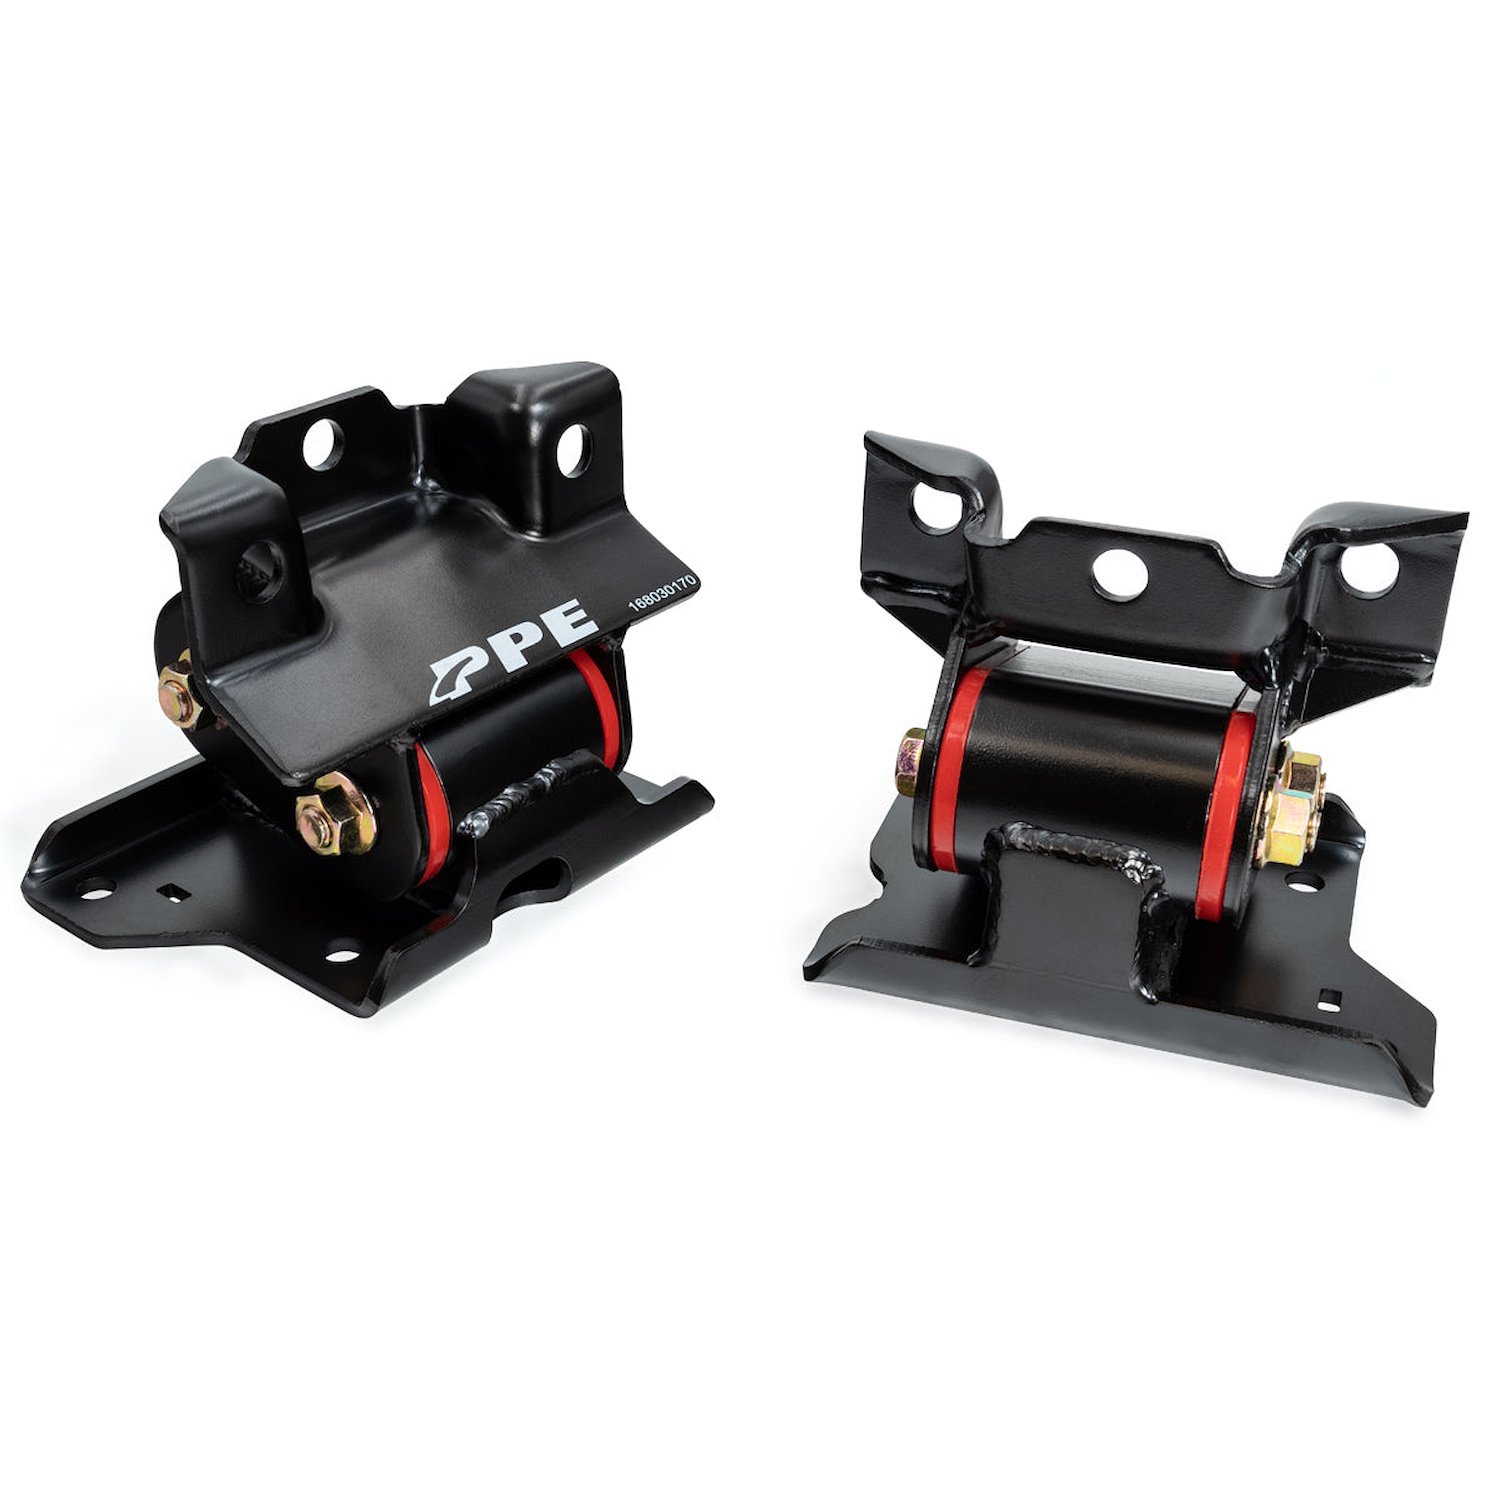 168030170 Engine Mount Kit with High-Performance Silicone Bushings - 01-10 GM 6.6L Duramax - 70 Hardness